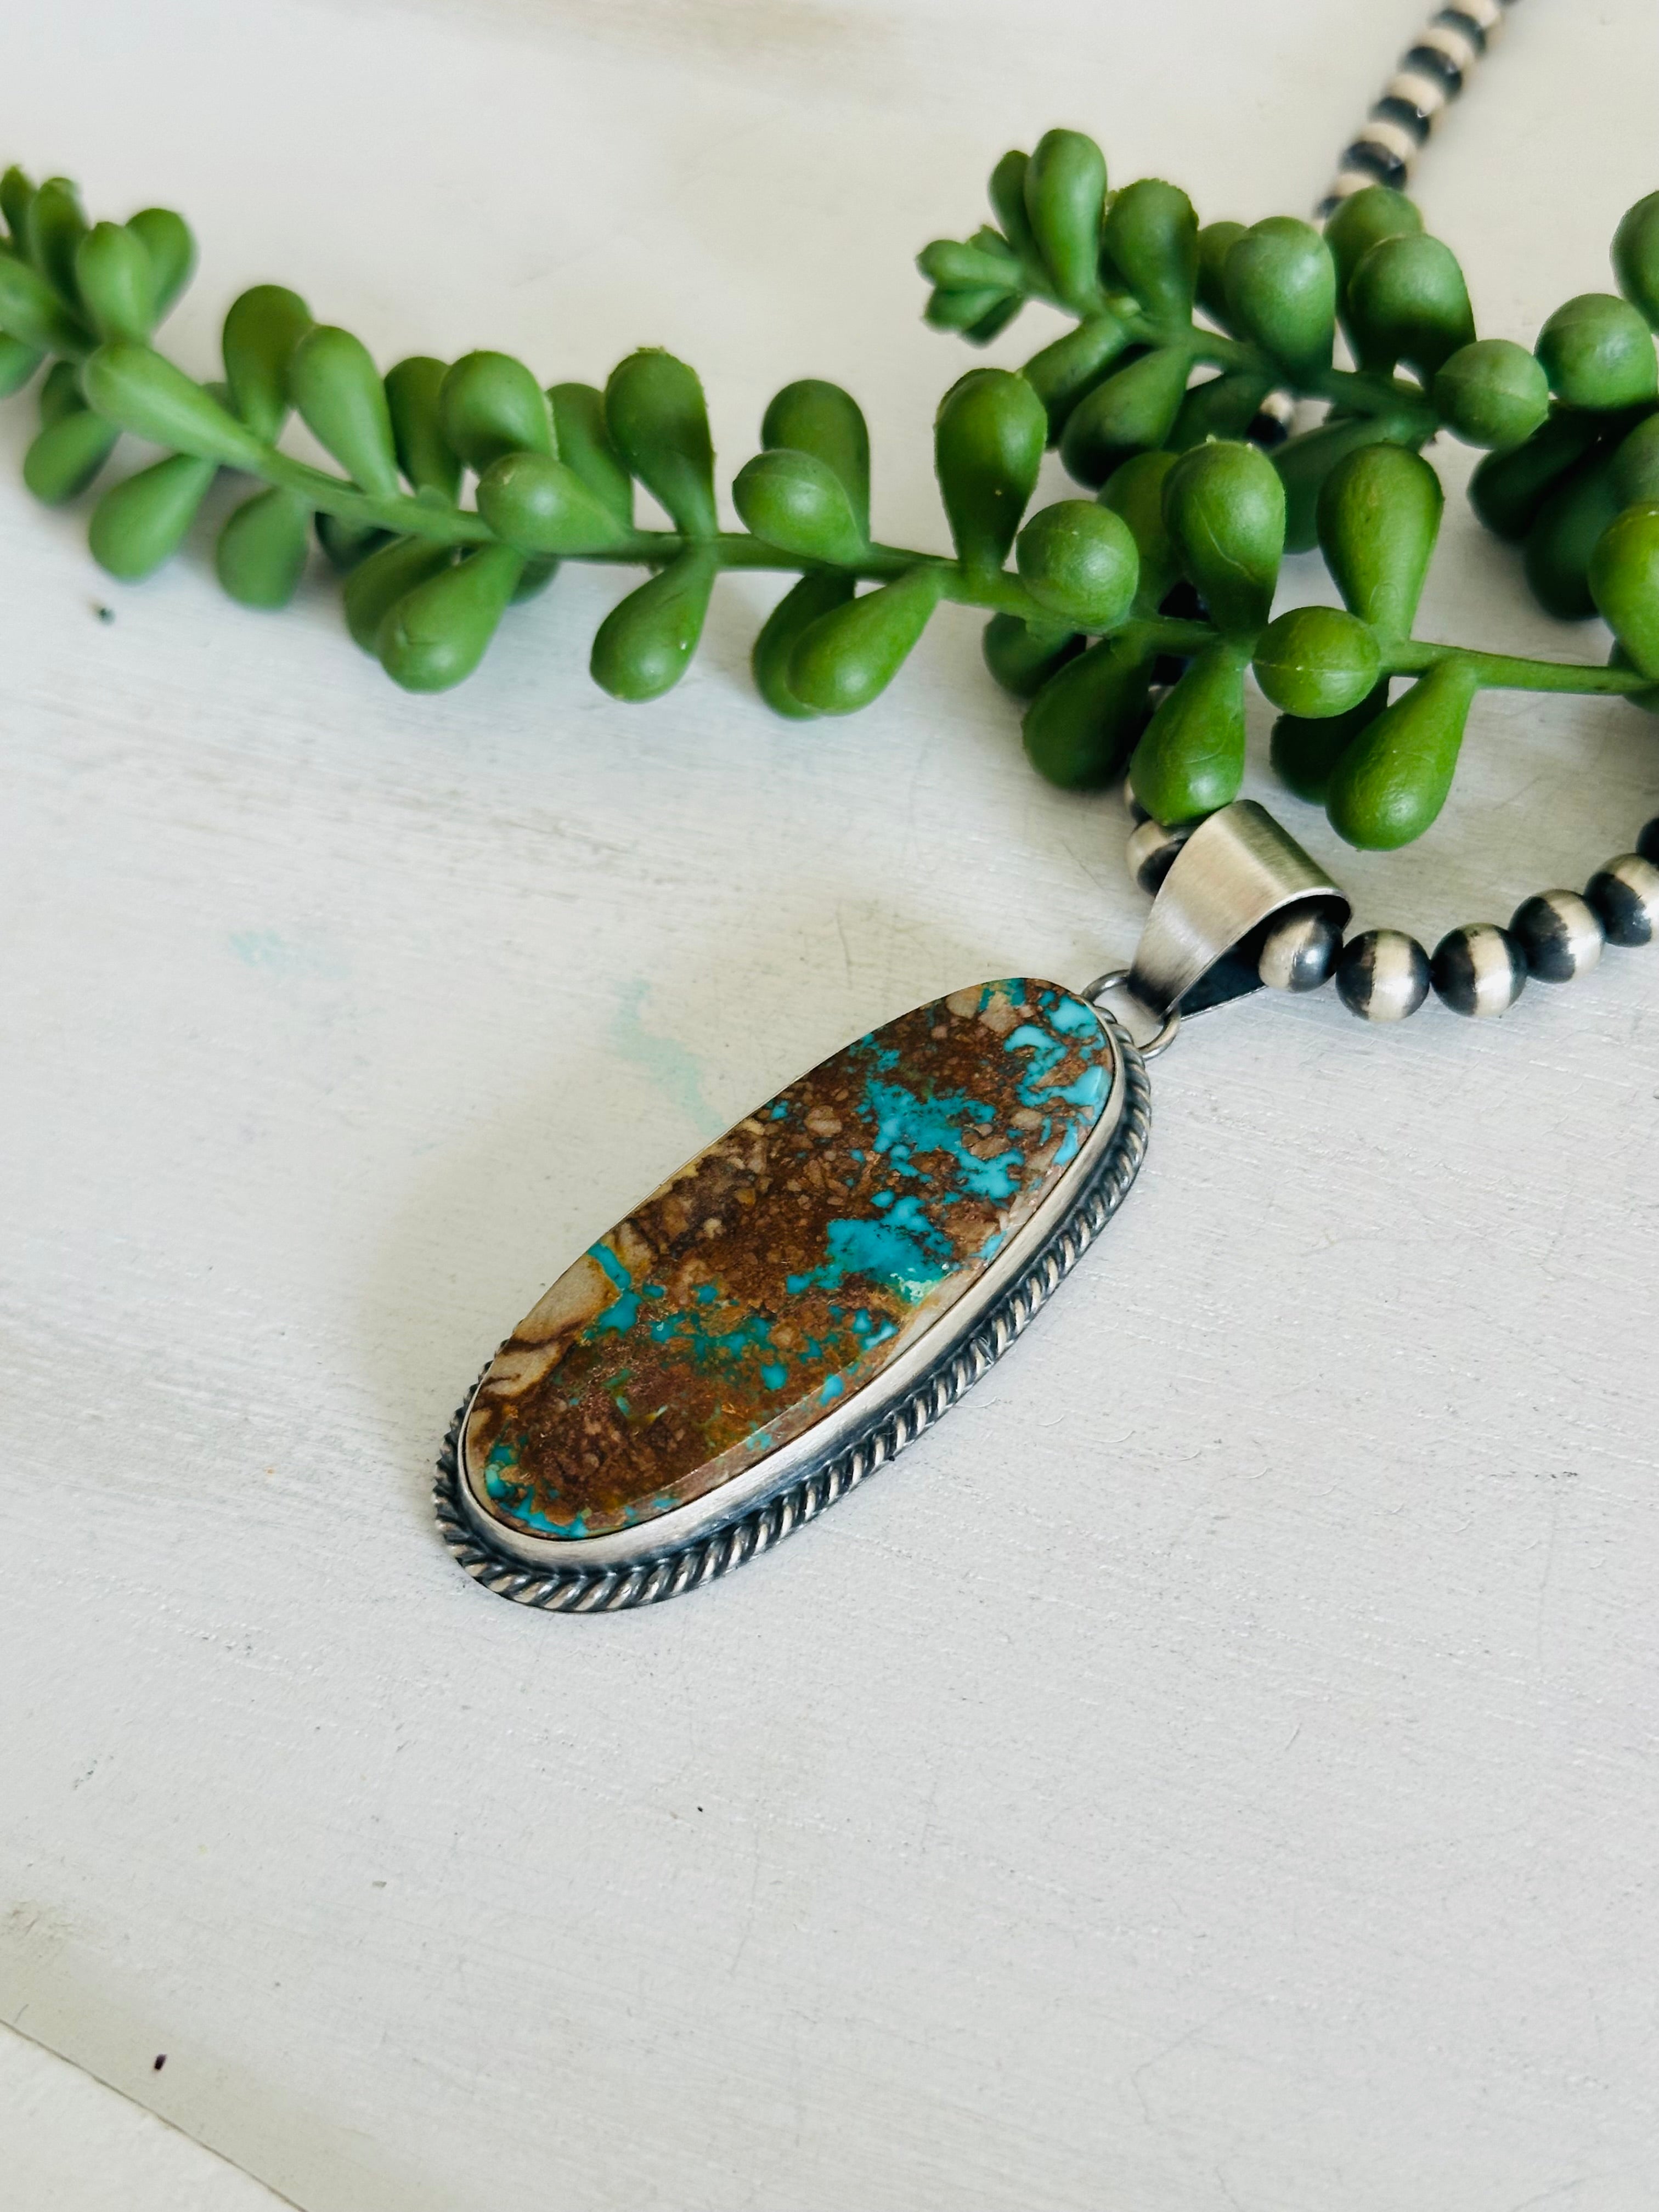 Dave Skeets Royston Turquoise & Sterling Silver Pendant